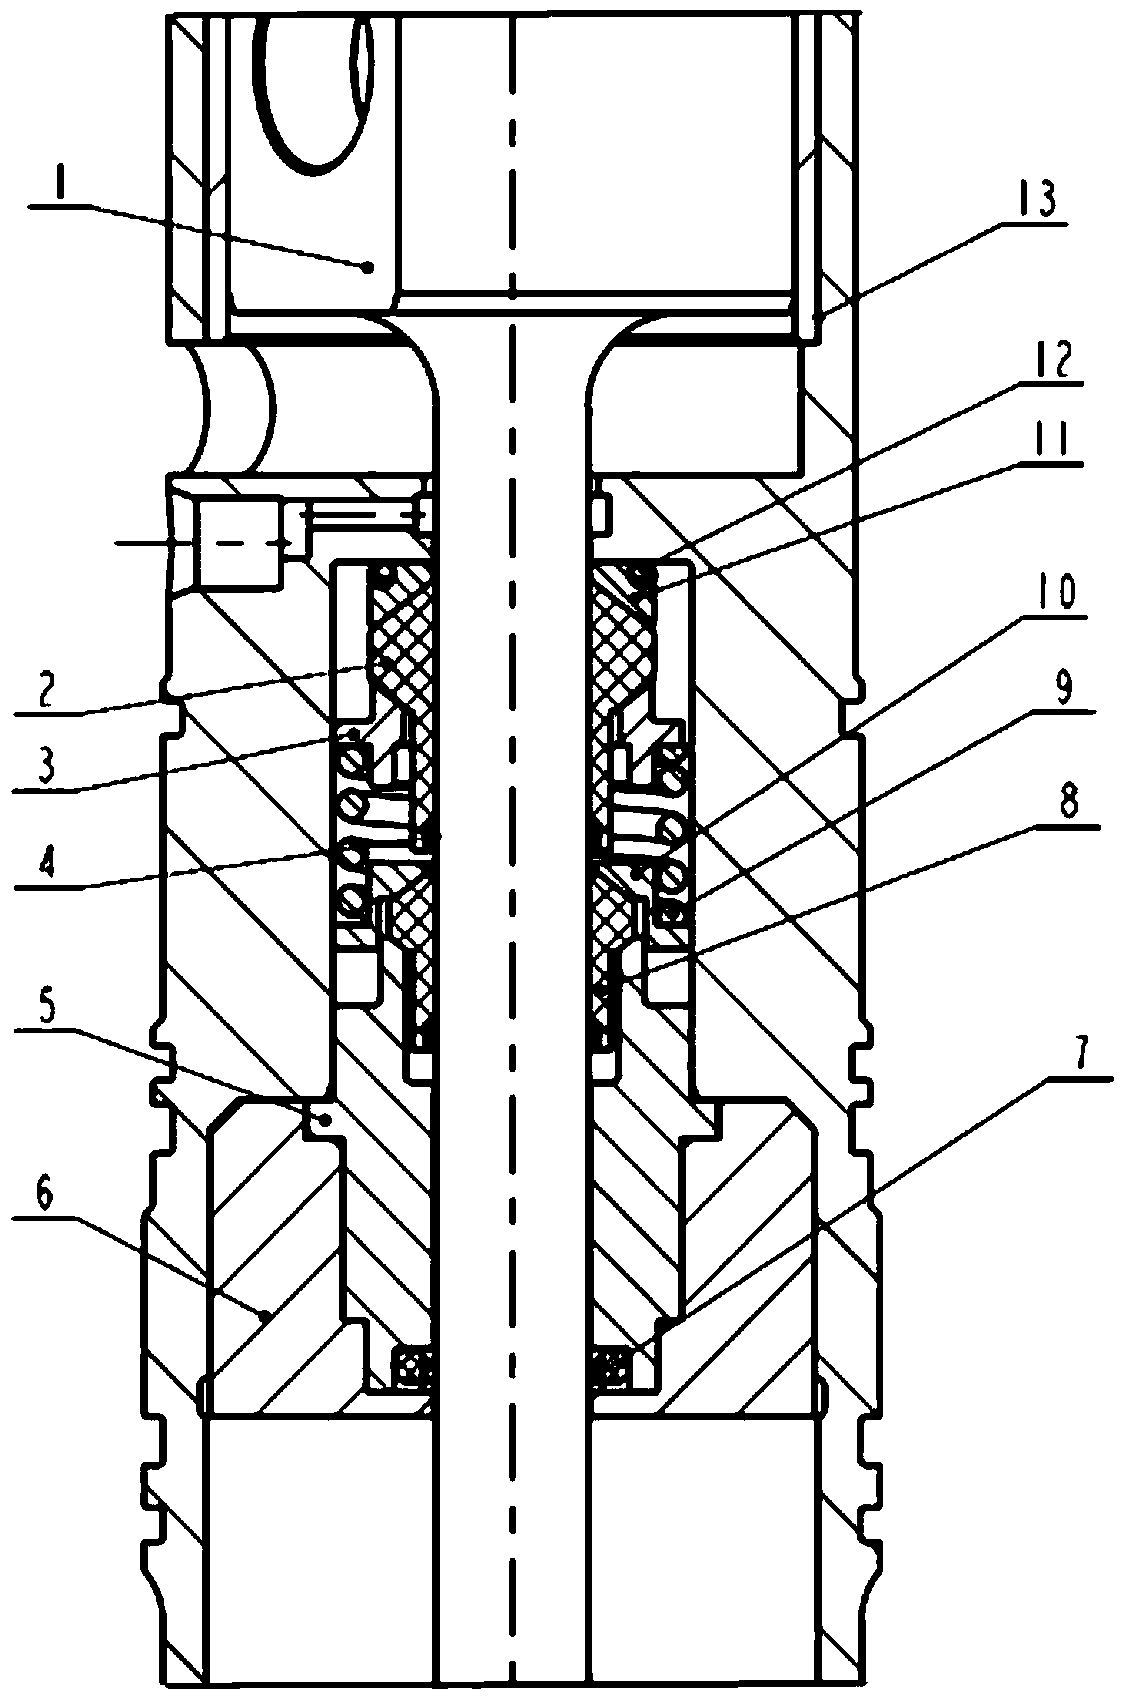 A piston rod seal assembly for a hot air engine